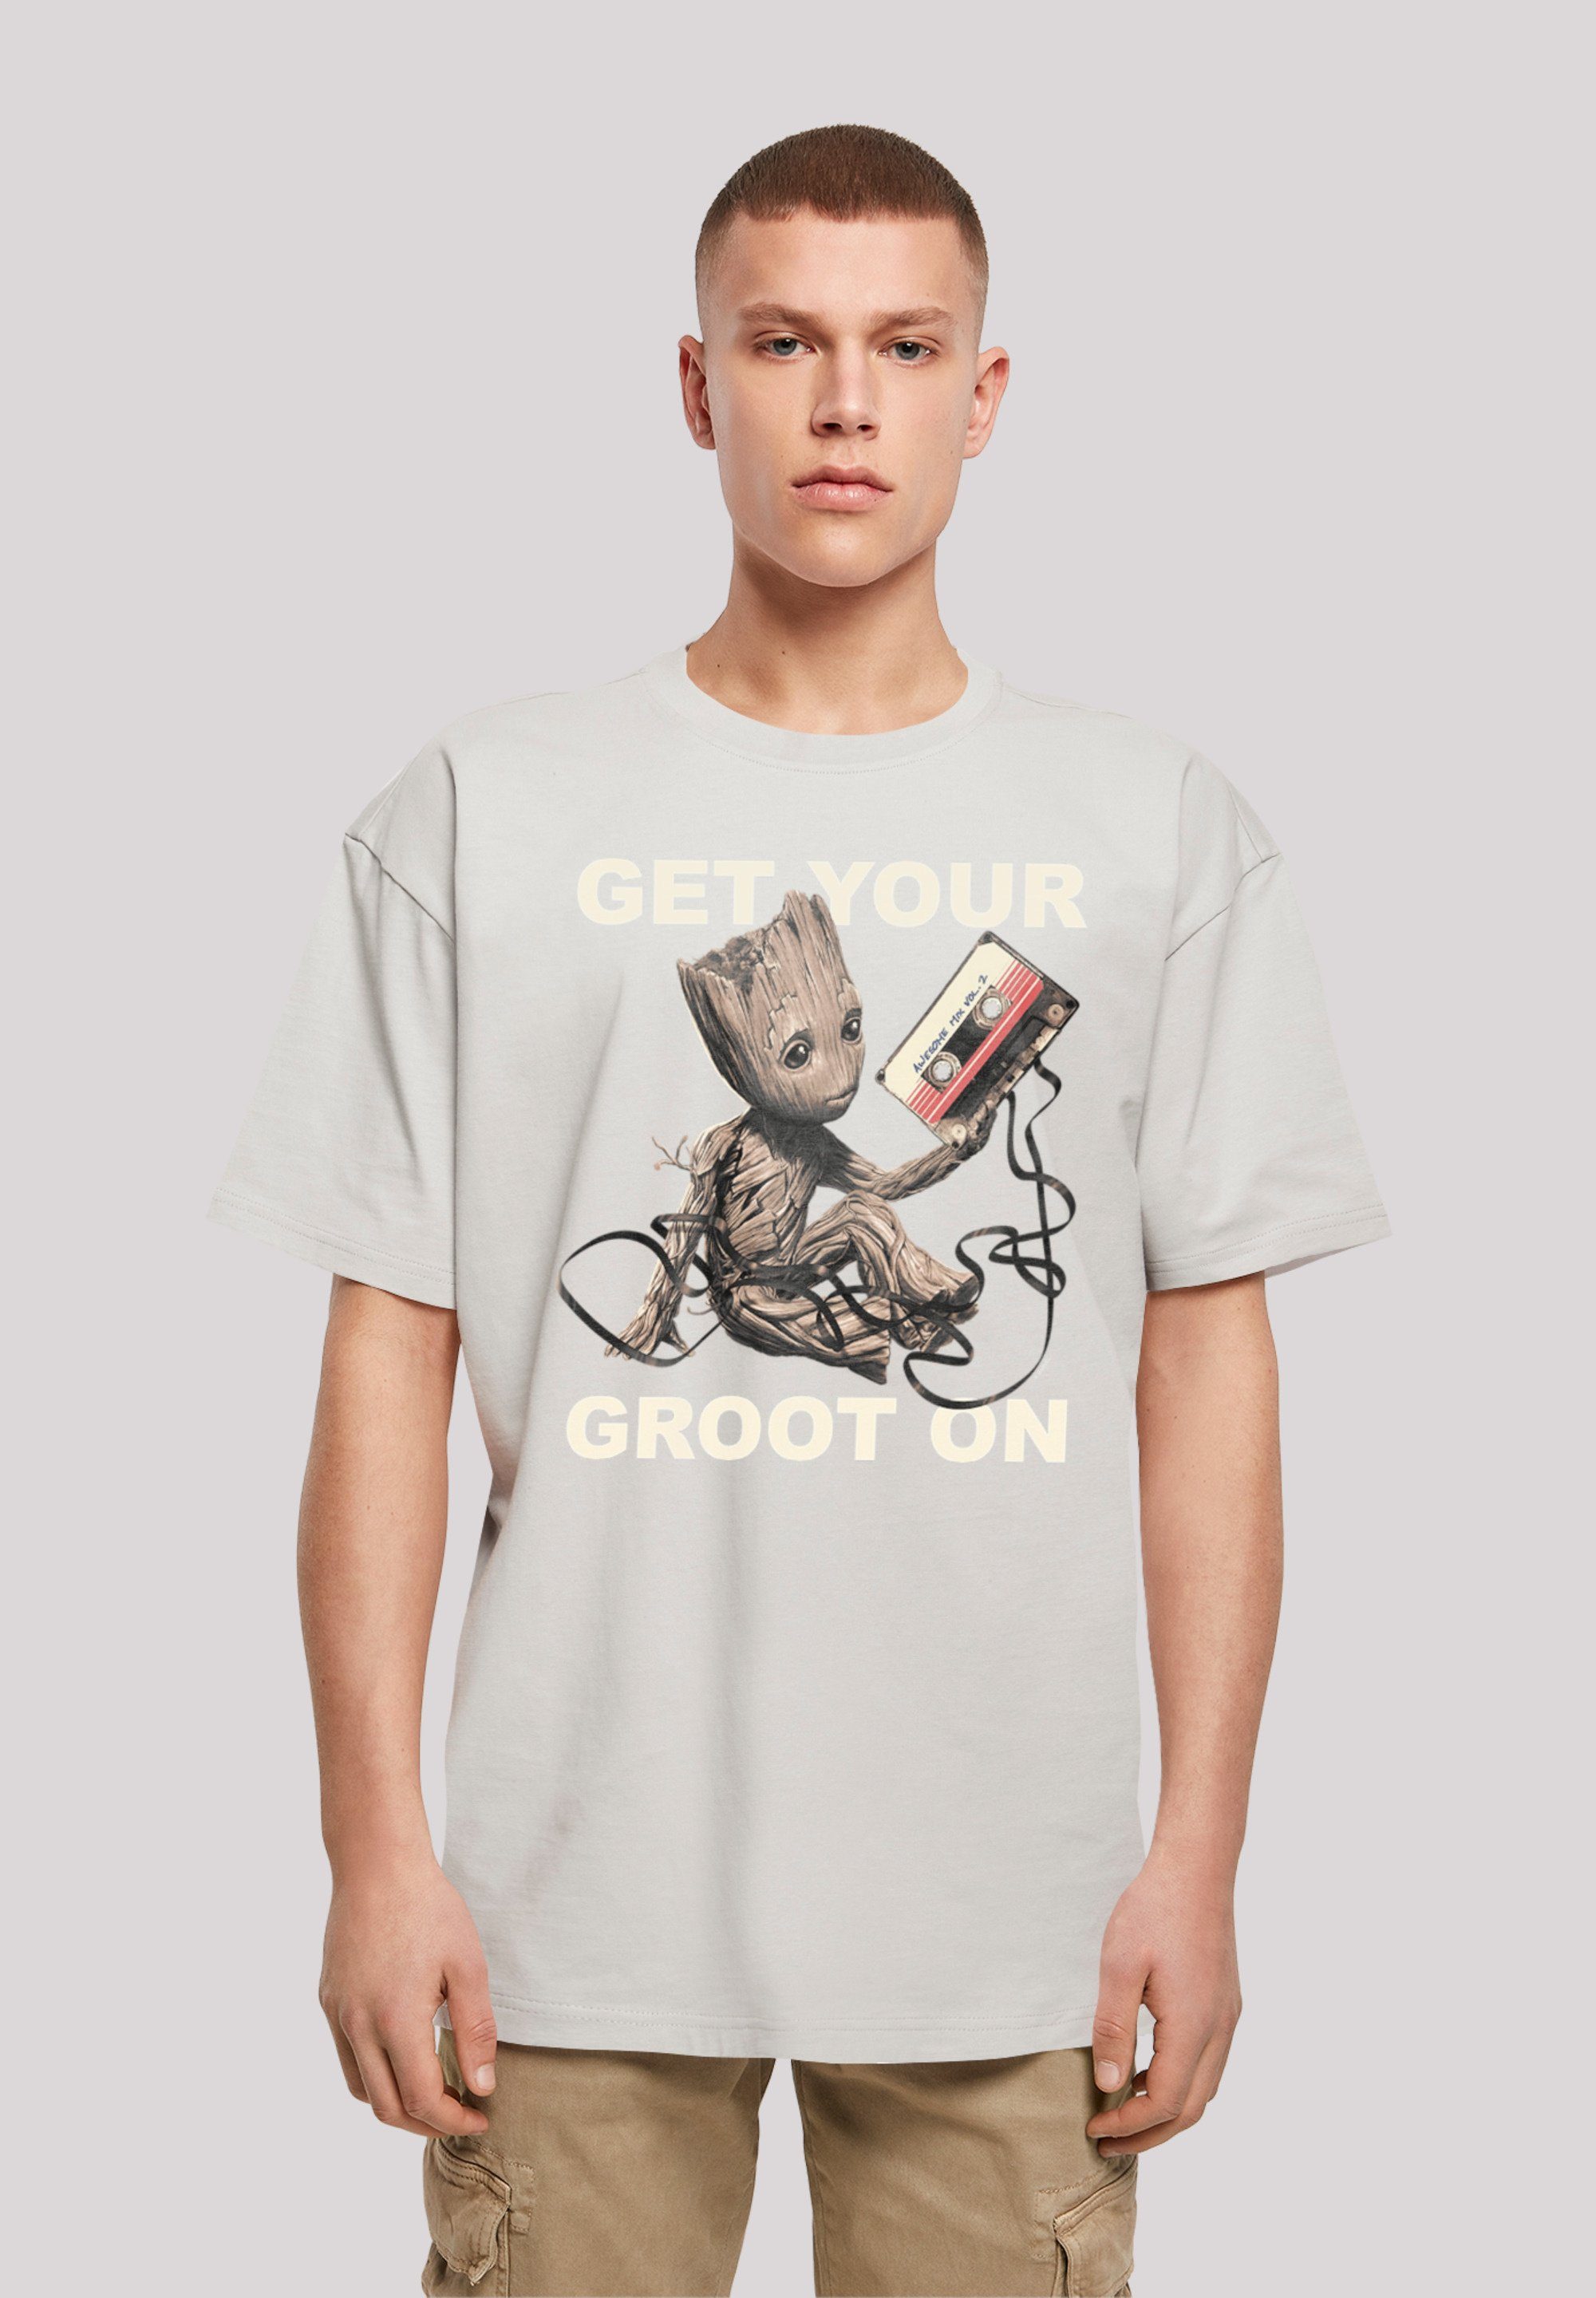 of the Groot T-Shirt Get Print F4NT4STIC your Guardians Marvel On Galaxy lightasphalt